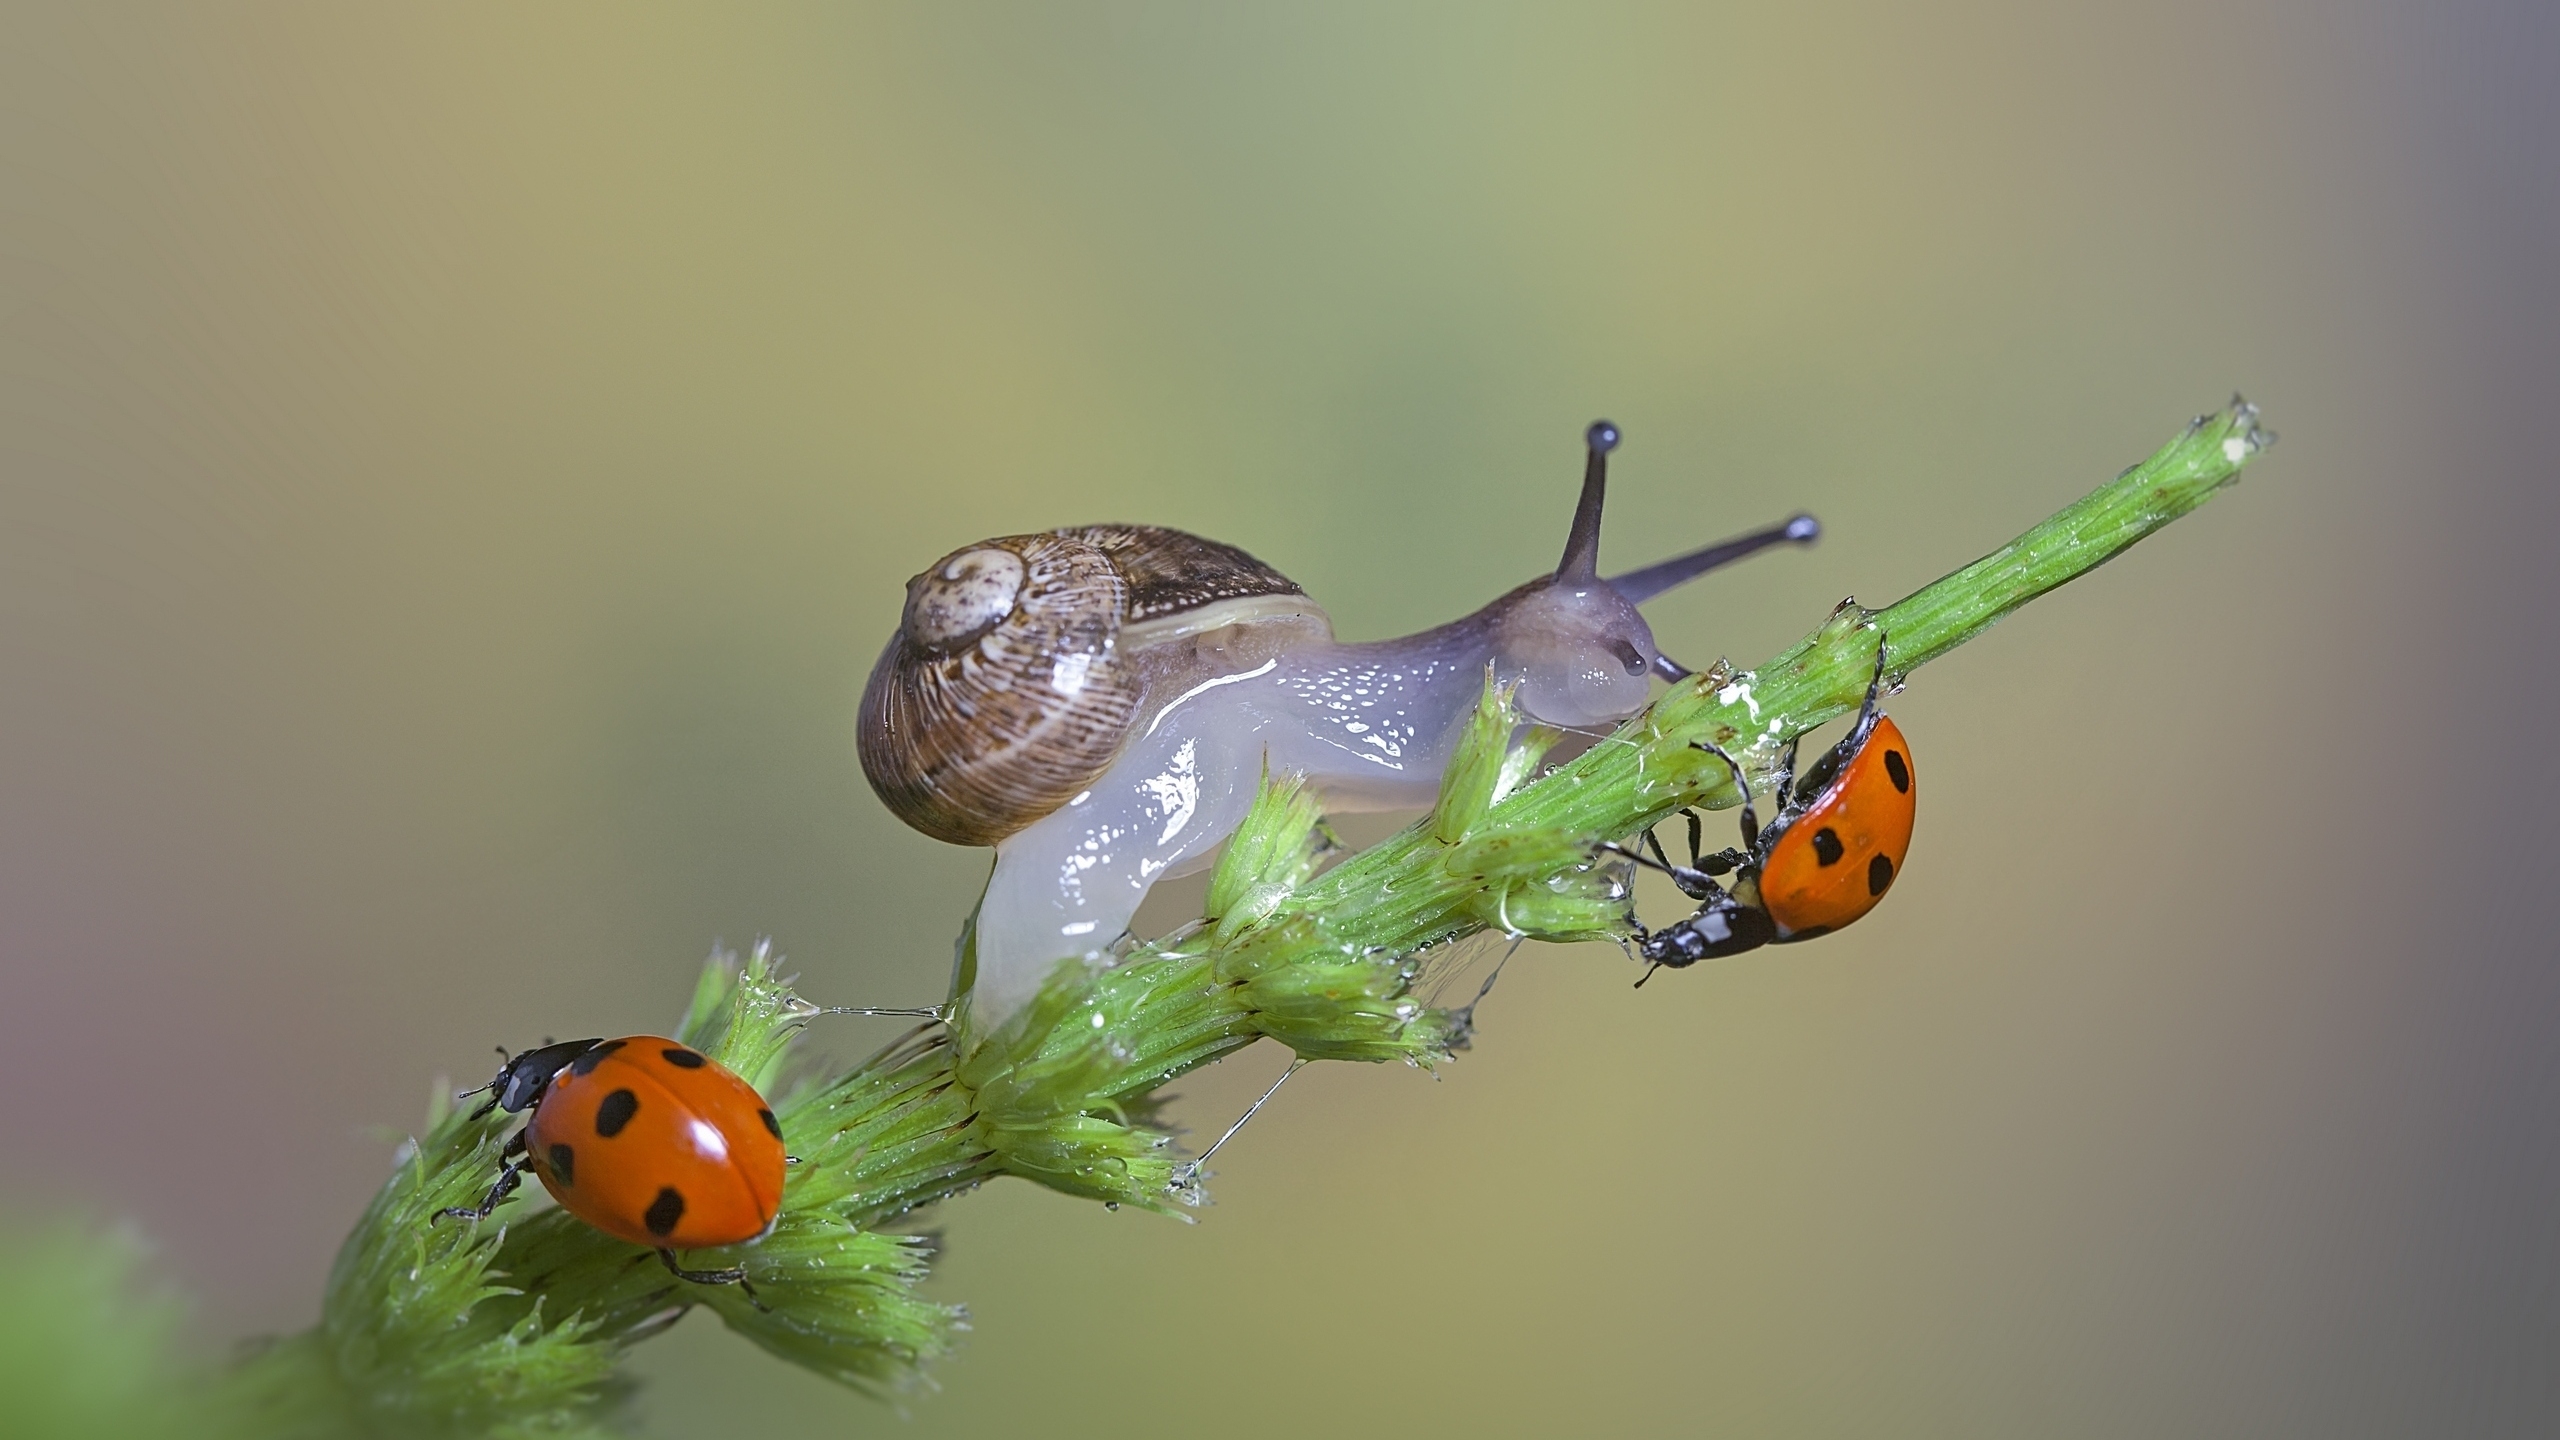 Snail and Ladybugs for 2560x1440 HDTV resolution